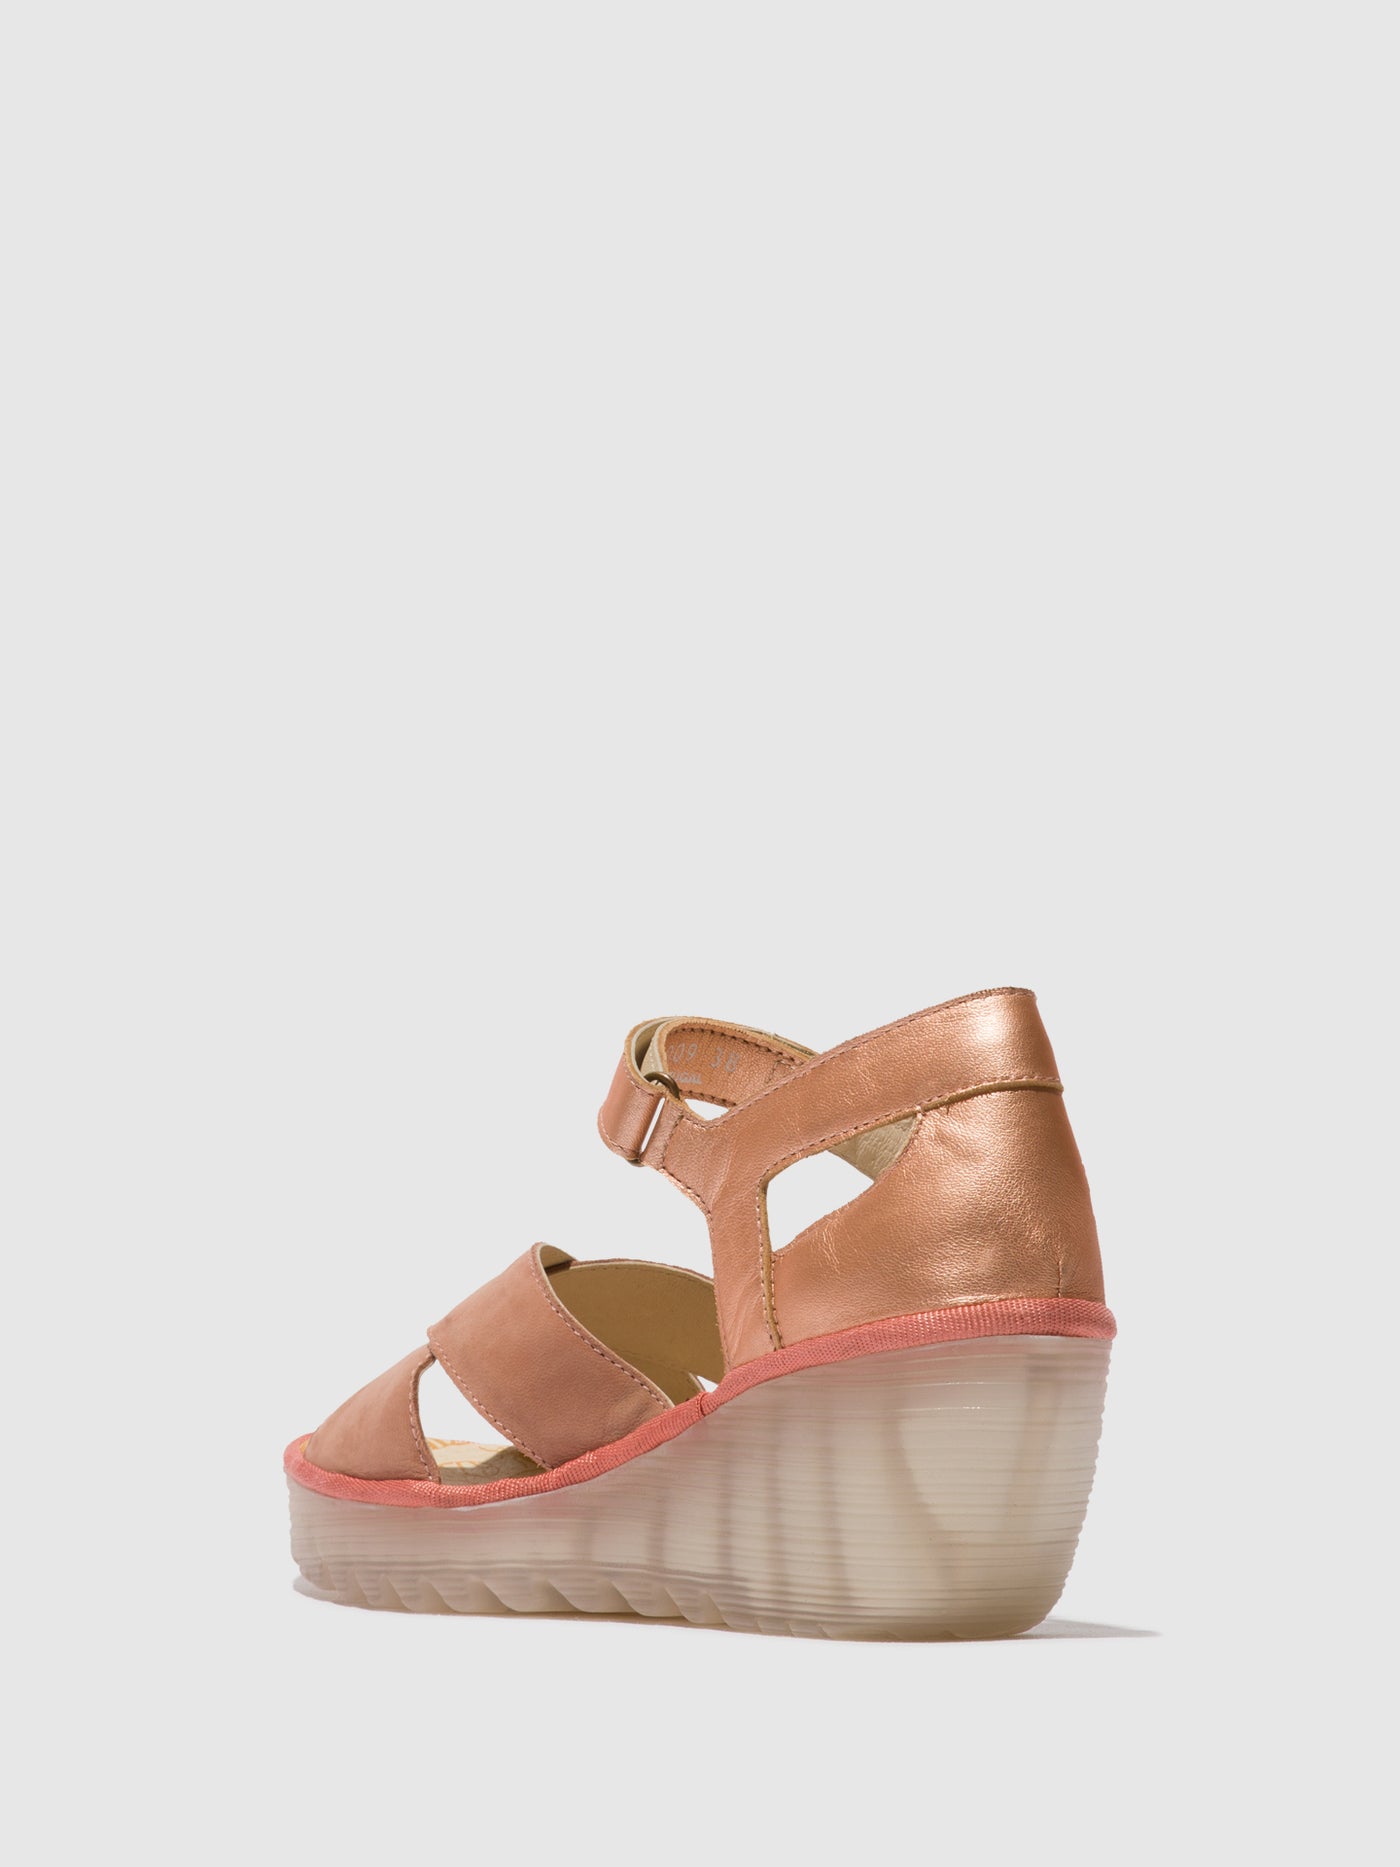 Ankle Strap Sandals YENT365FLY PINK/BLUSH GOLD